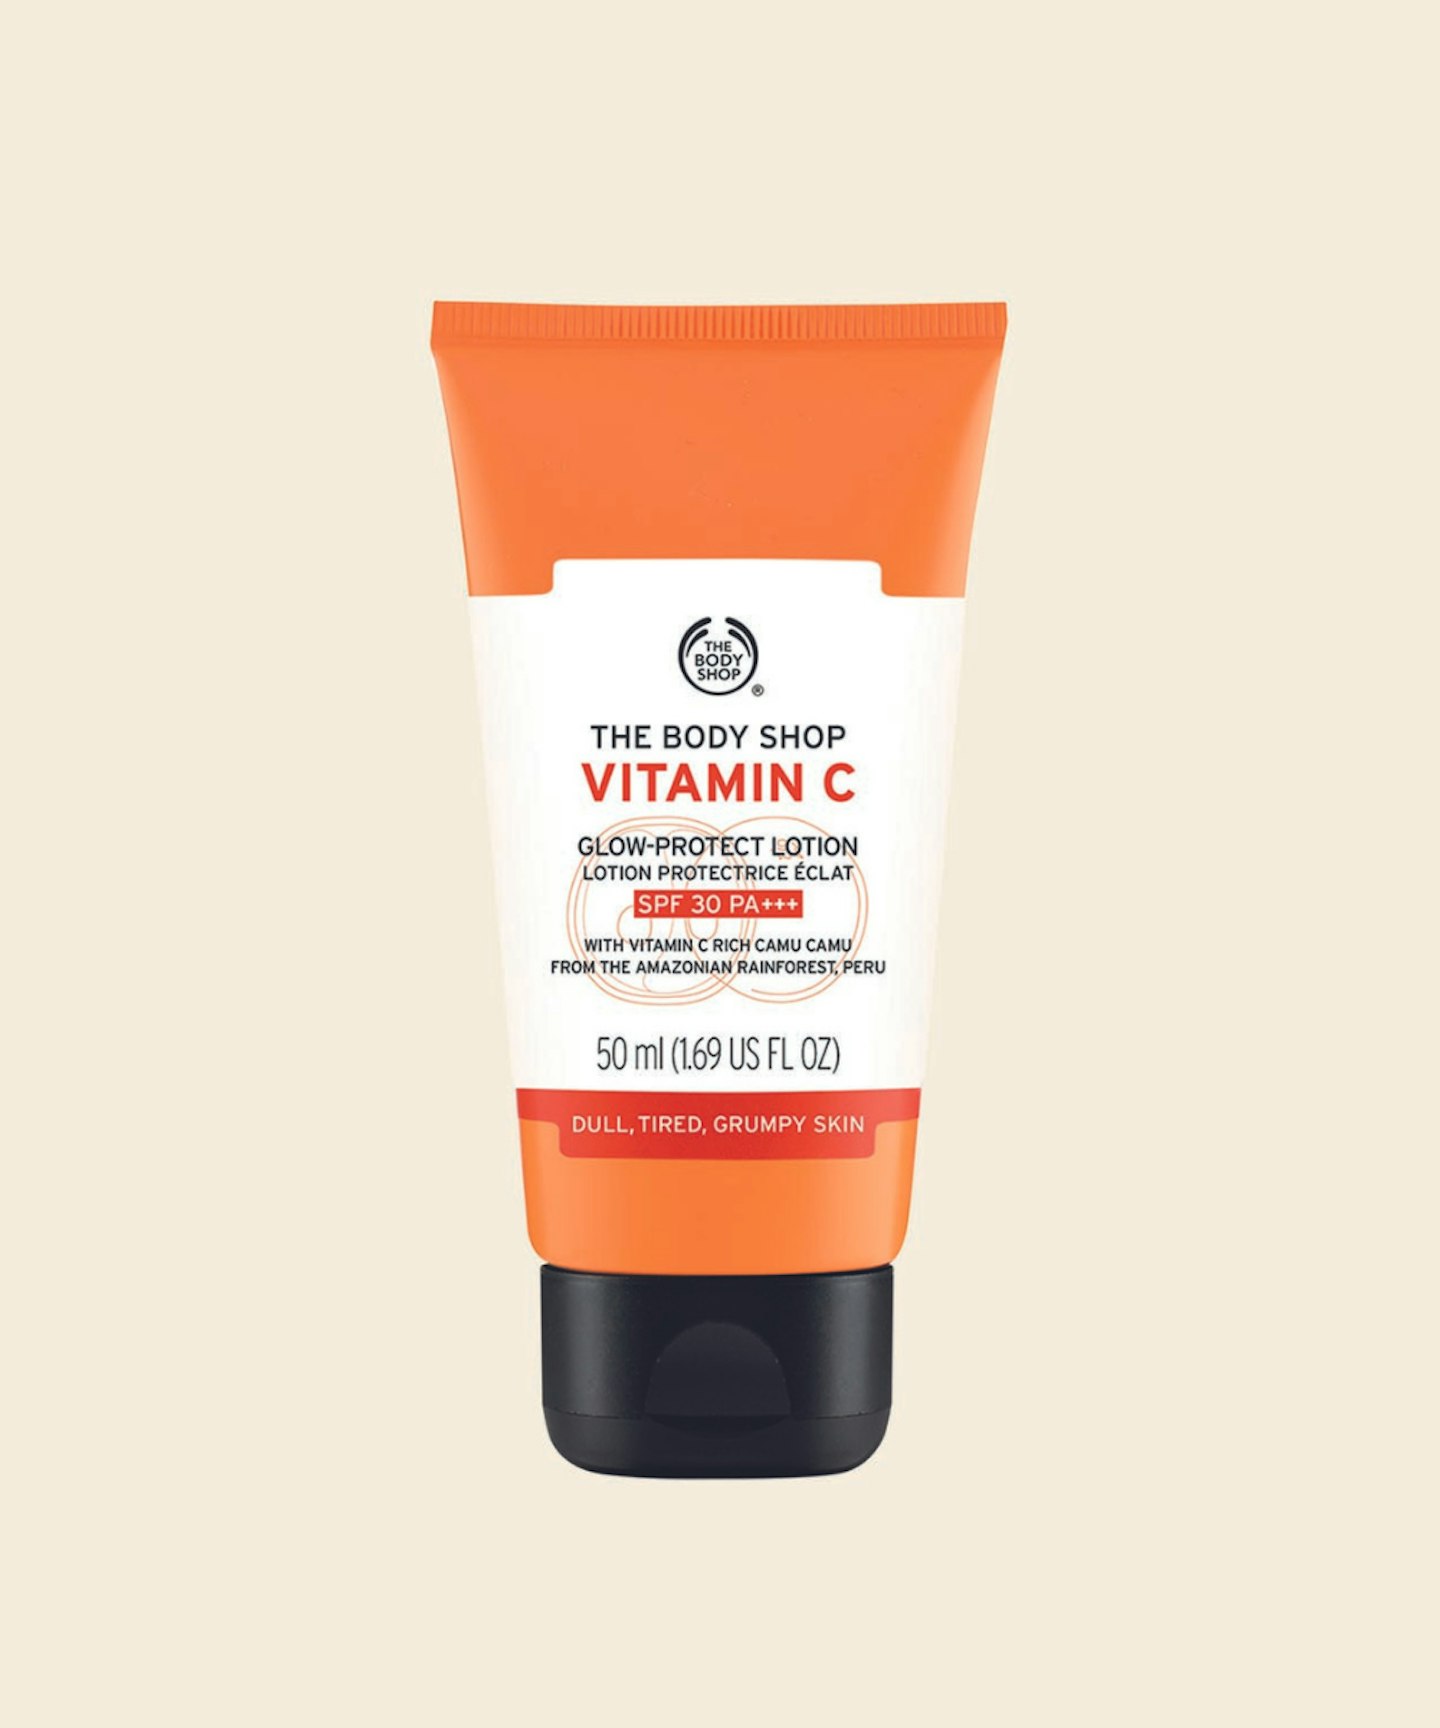 The Body Shop Vitamin C Glow-Protect Lotion SPF30